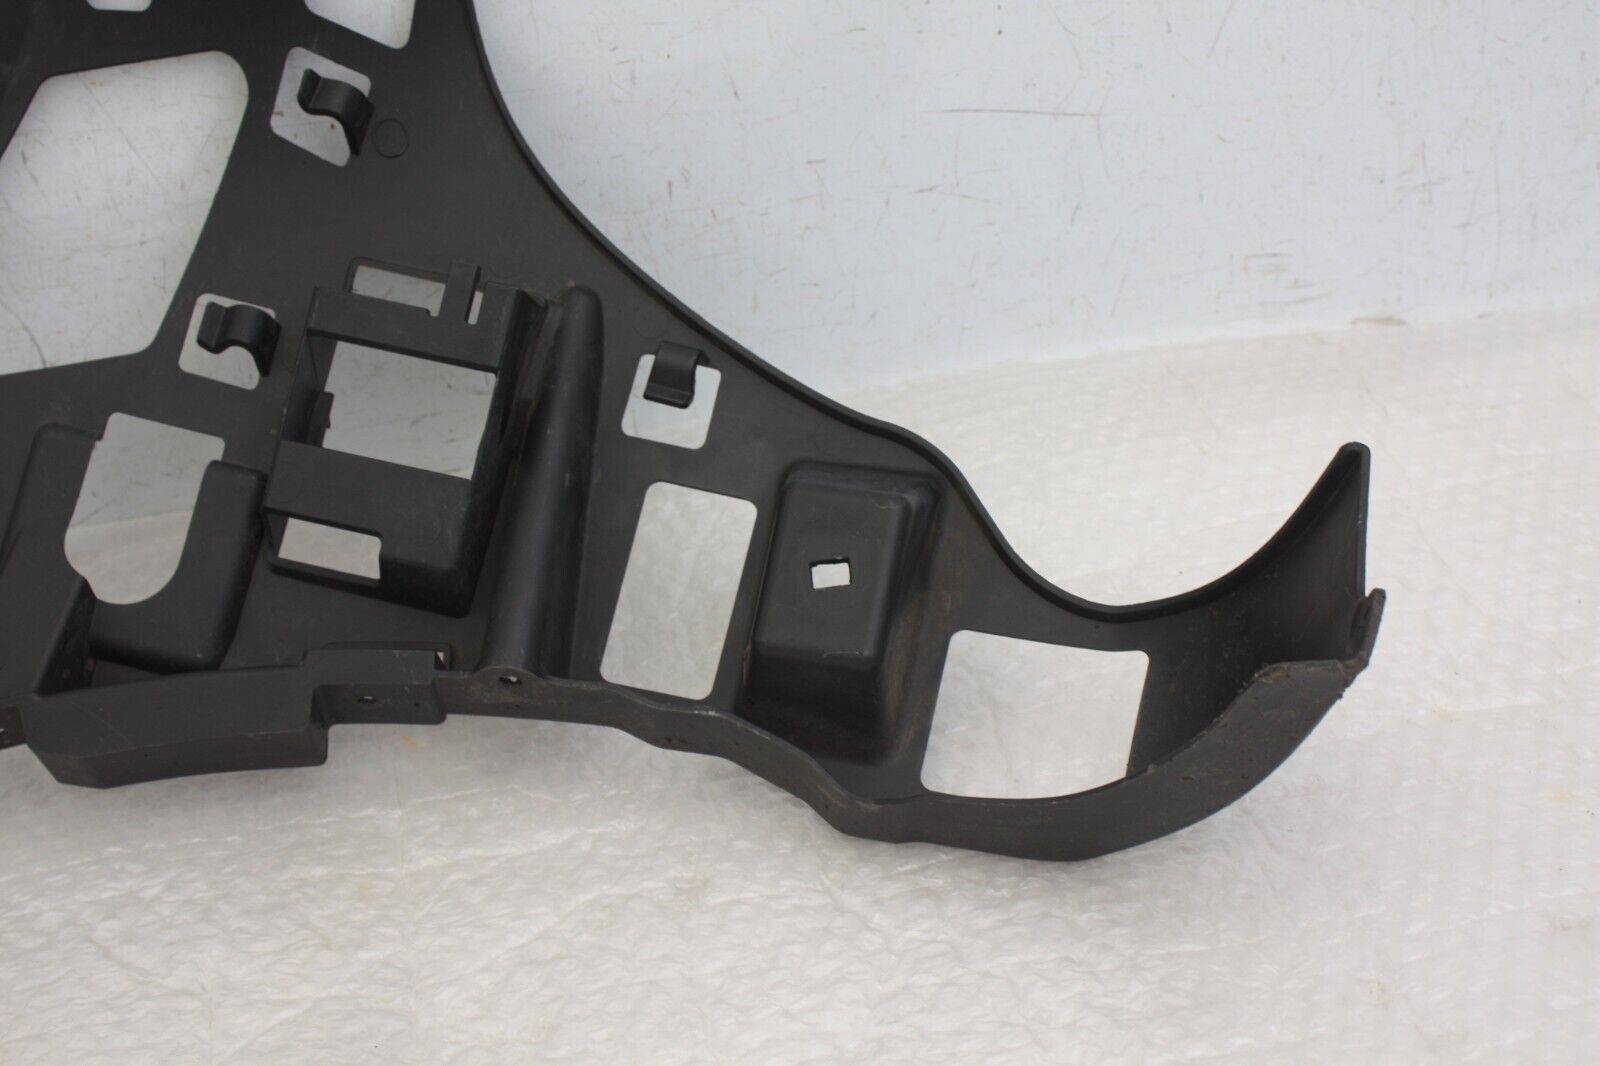 Mercedes-S-Class-W222-AMG-Front-Bumper-Left-Bracket-2017-TO-2021-A2228856800-176352019956-13